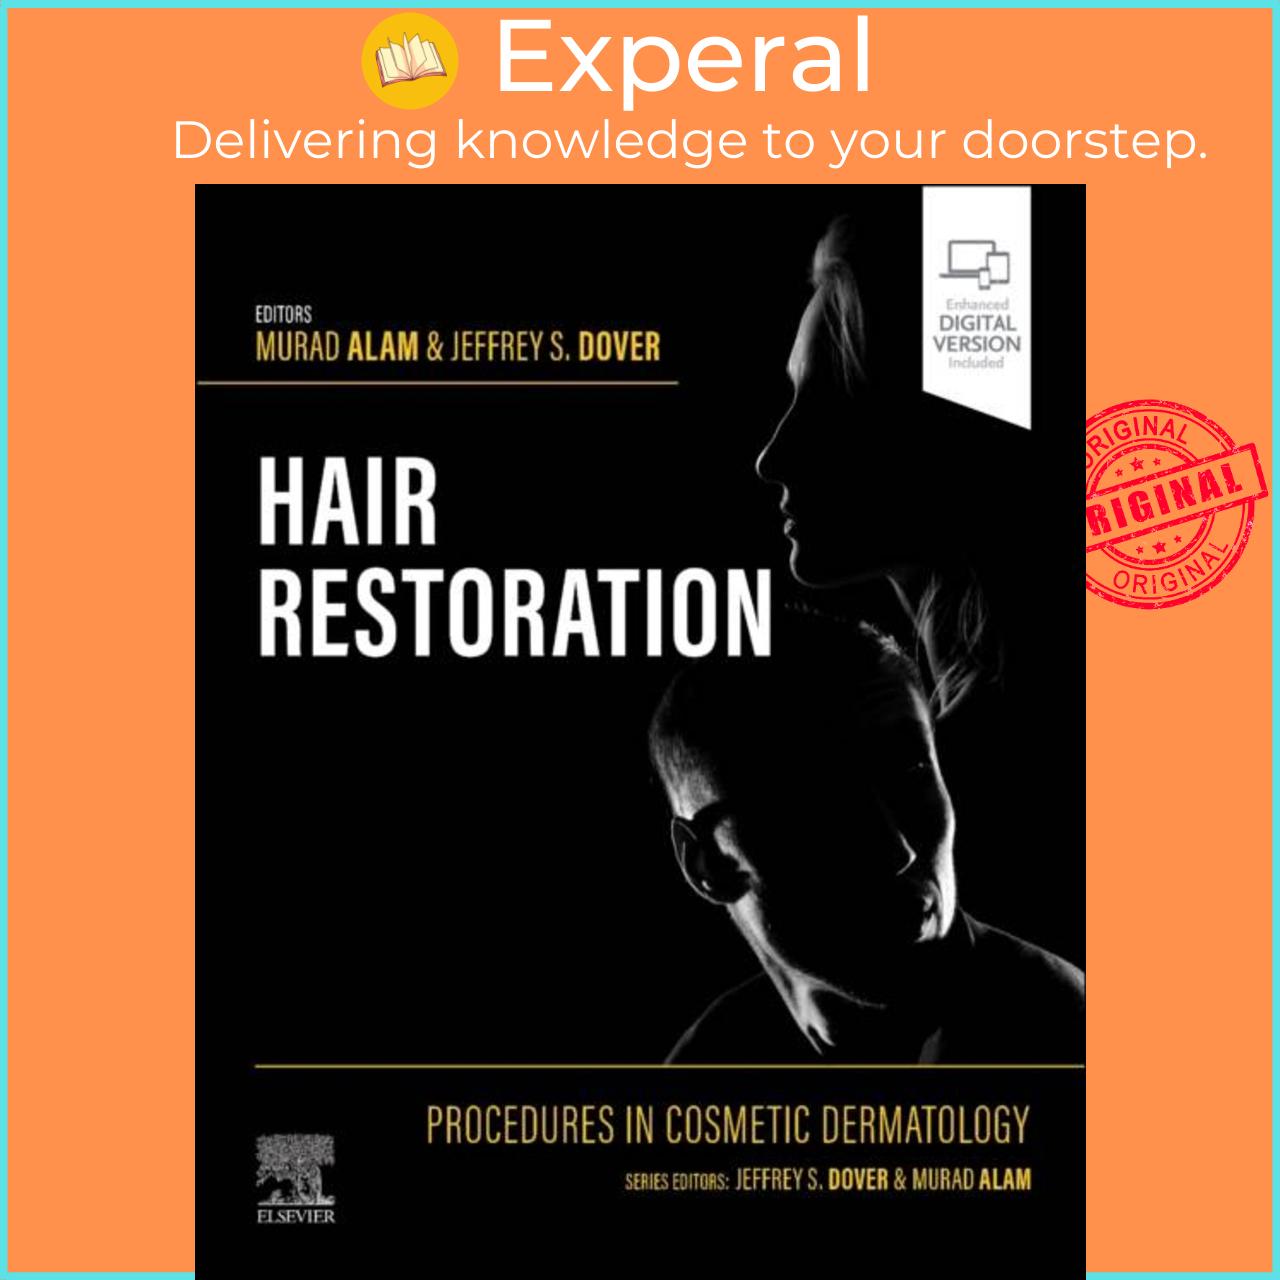 Sách - Procedures in Cosmetic Dermatology: Hair Restoration by Murad, MD, MSCI, MBA Alam (UK edition, hardcover)